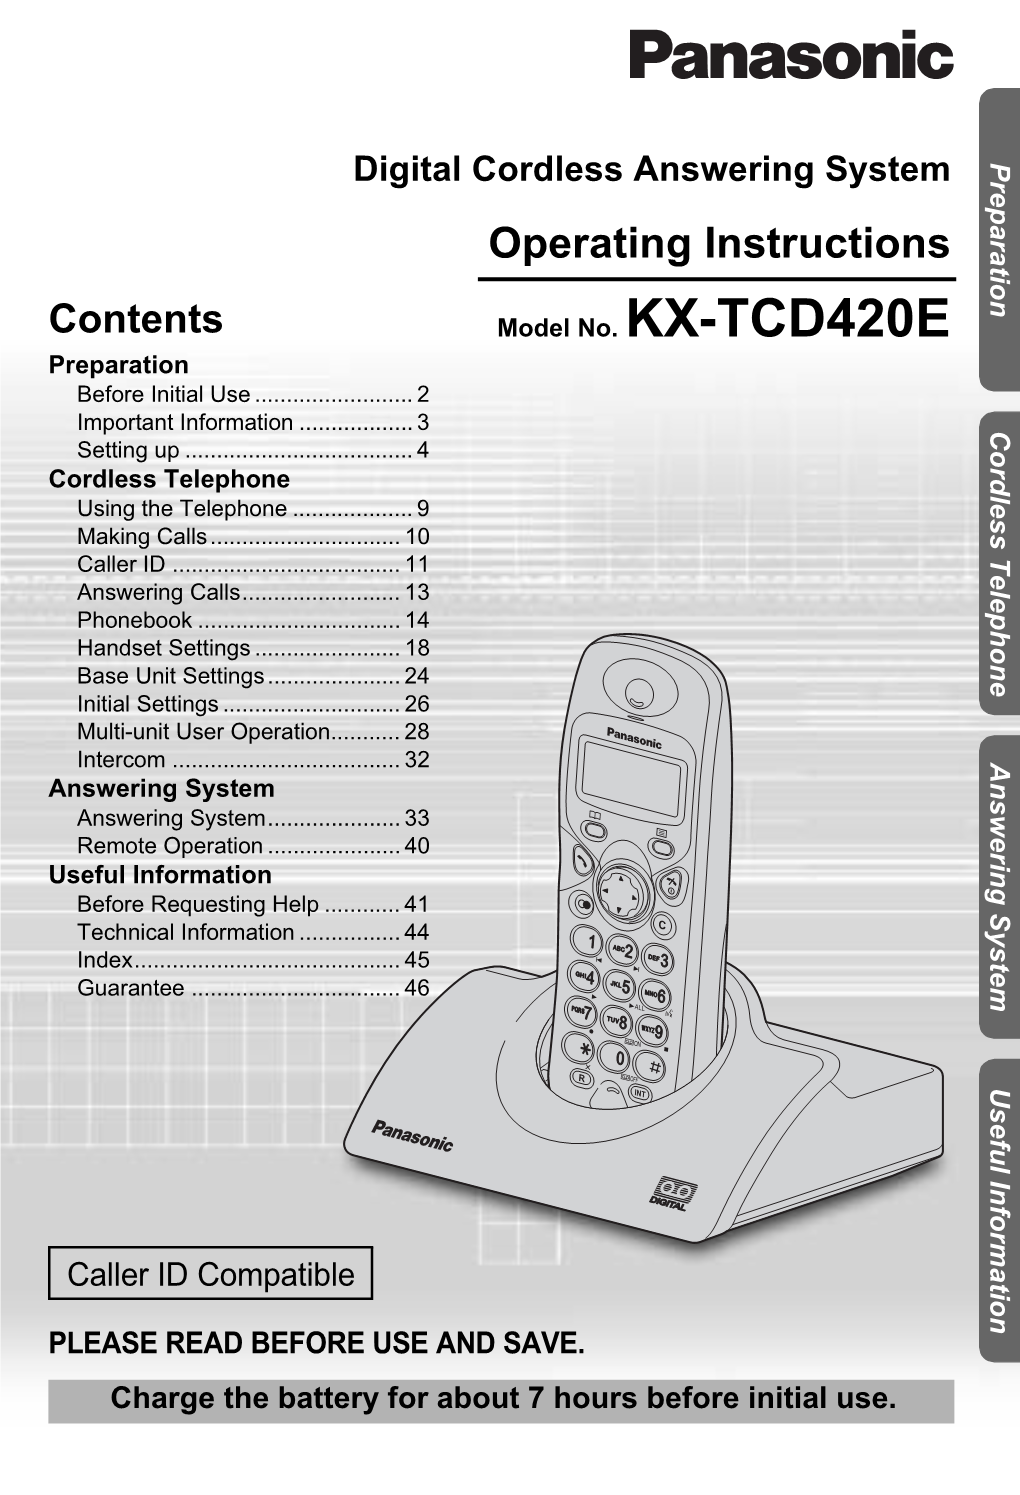 Digital Cordless Answering System Preparation Operating Instructions